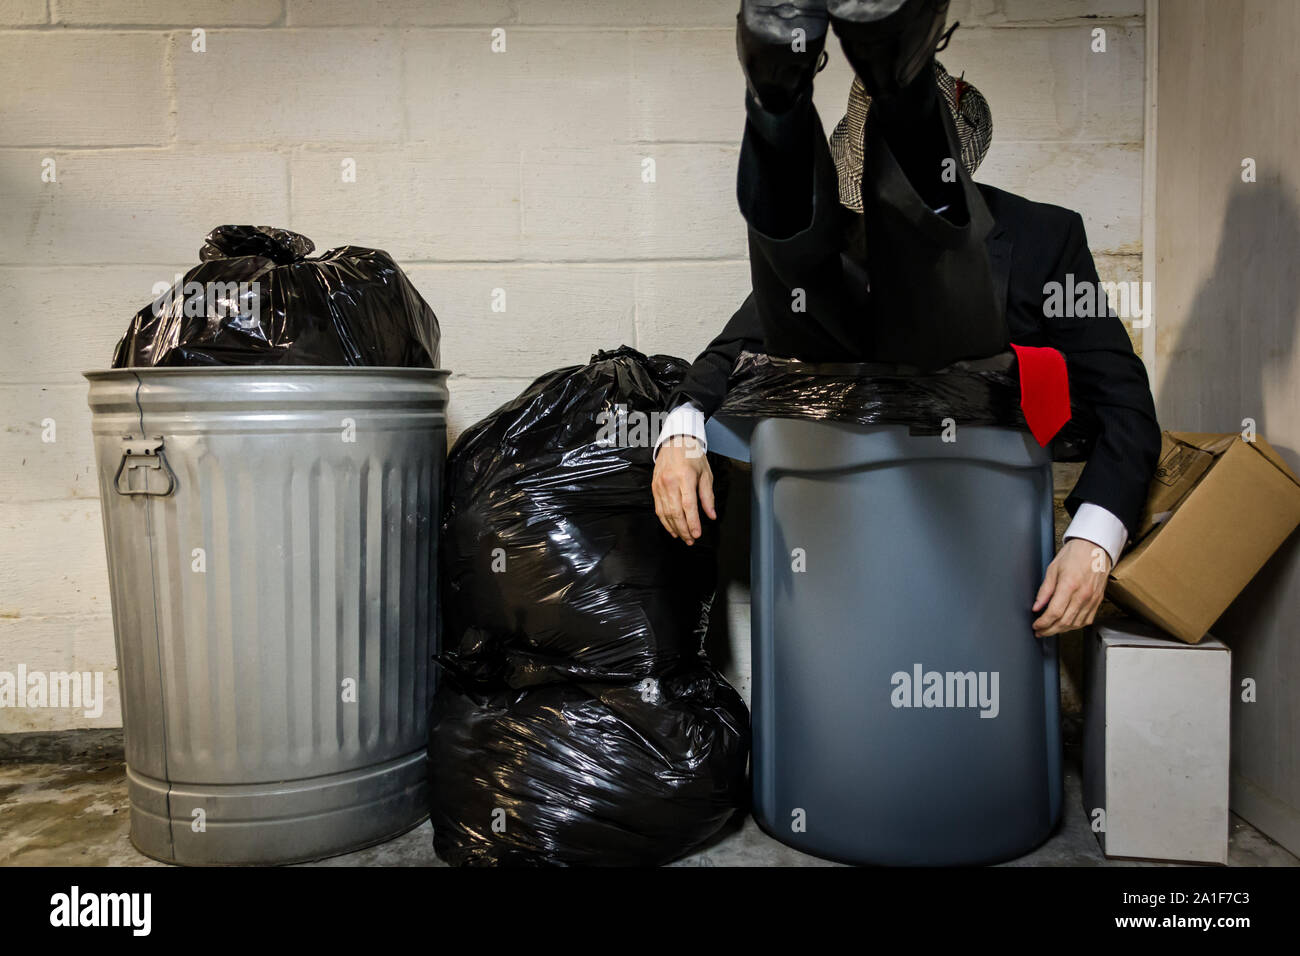 Businessman Sitting in Trash Can/Bin Next to Rubbish. Concept of Defeat and Despair. Dark Stock Photo. Stock Market Crash. Stock Photo